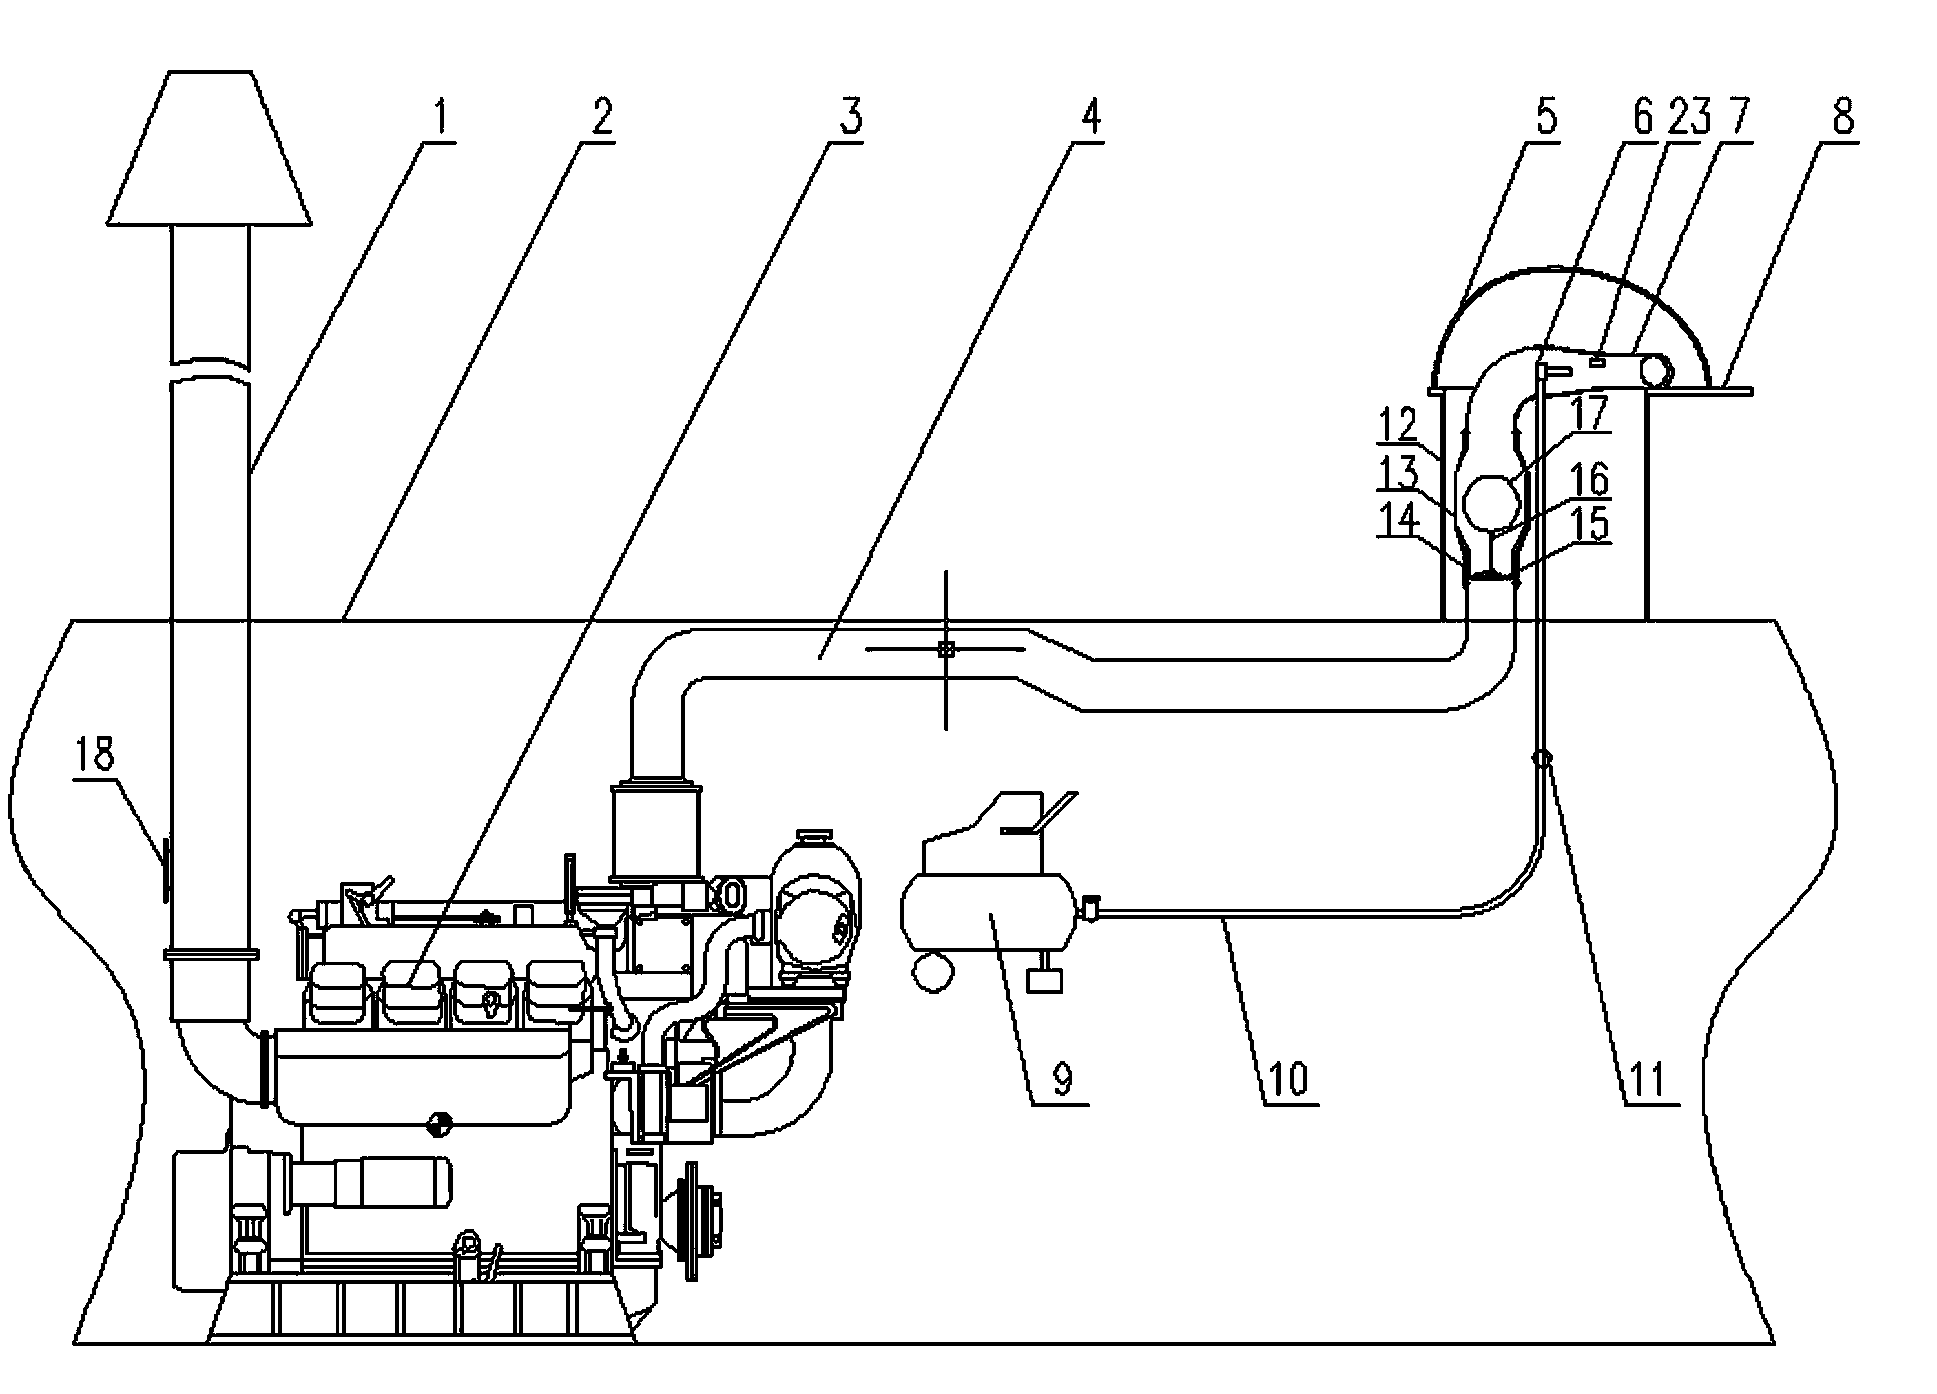 Underwater power and structure mixing pressurization exhaust device